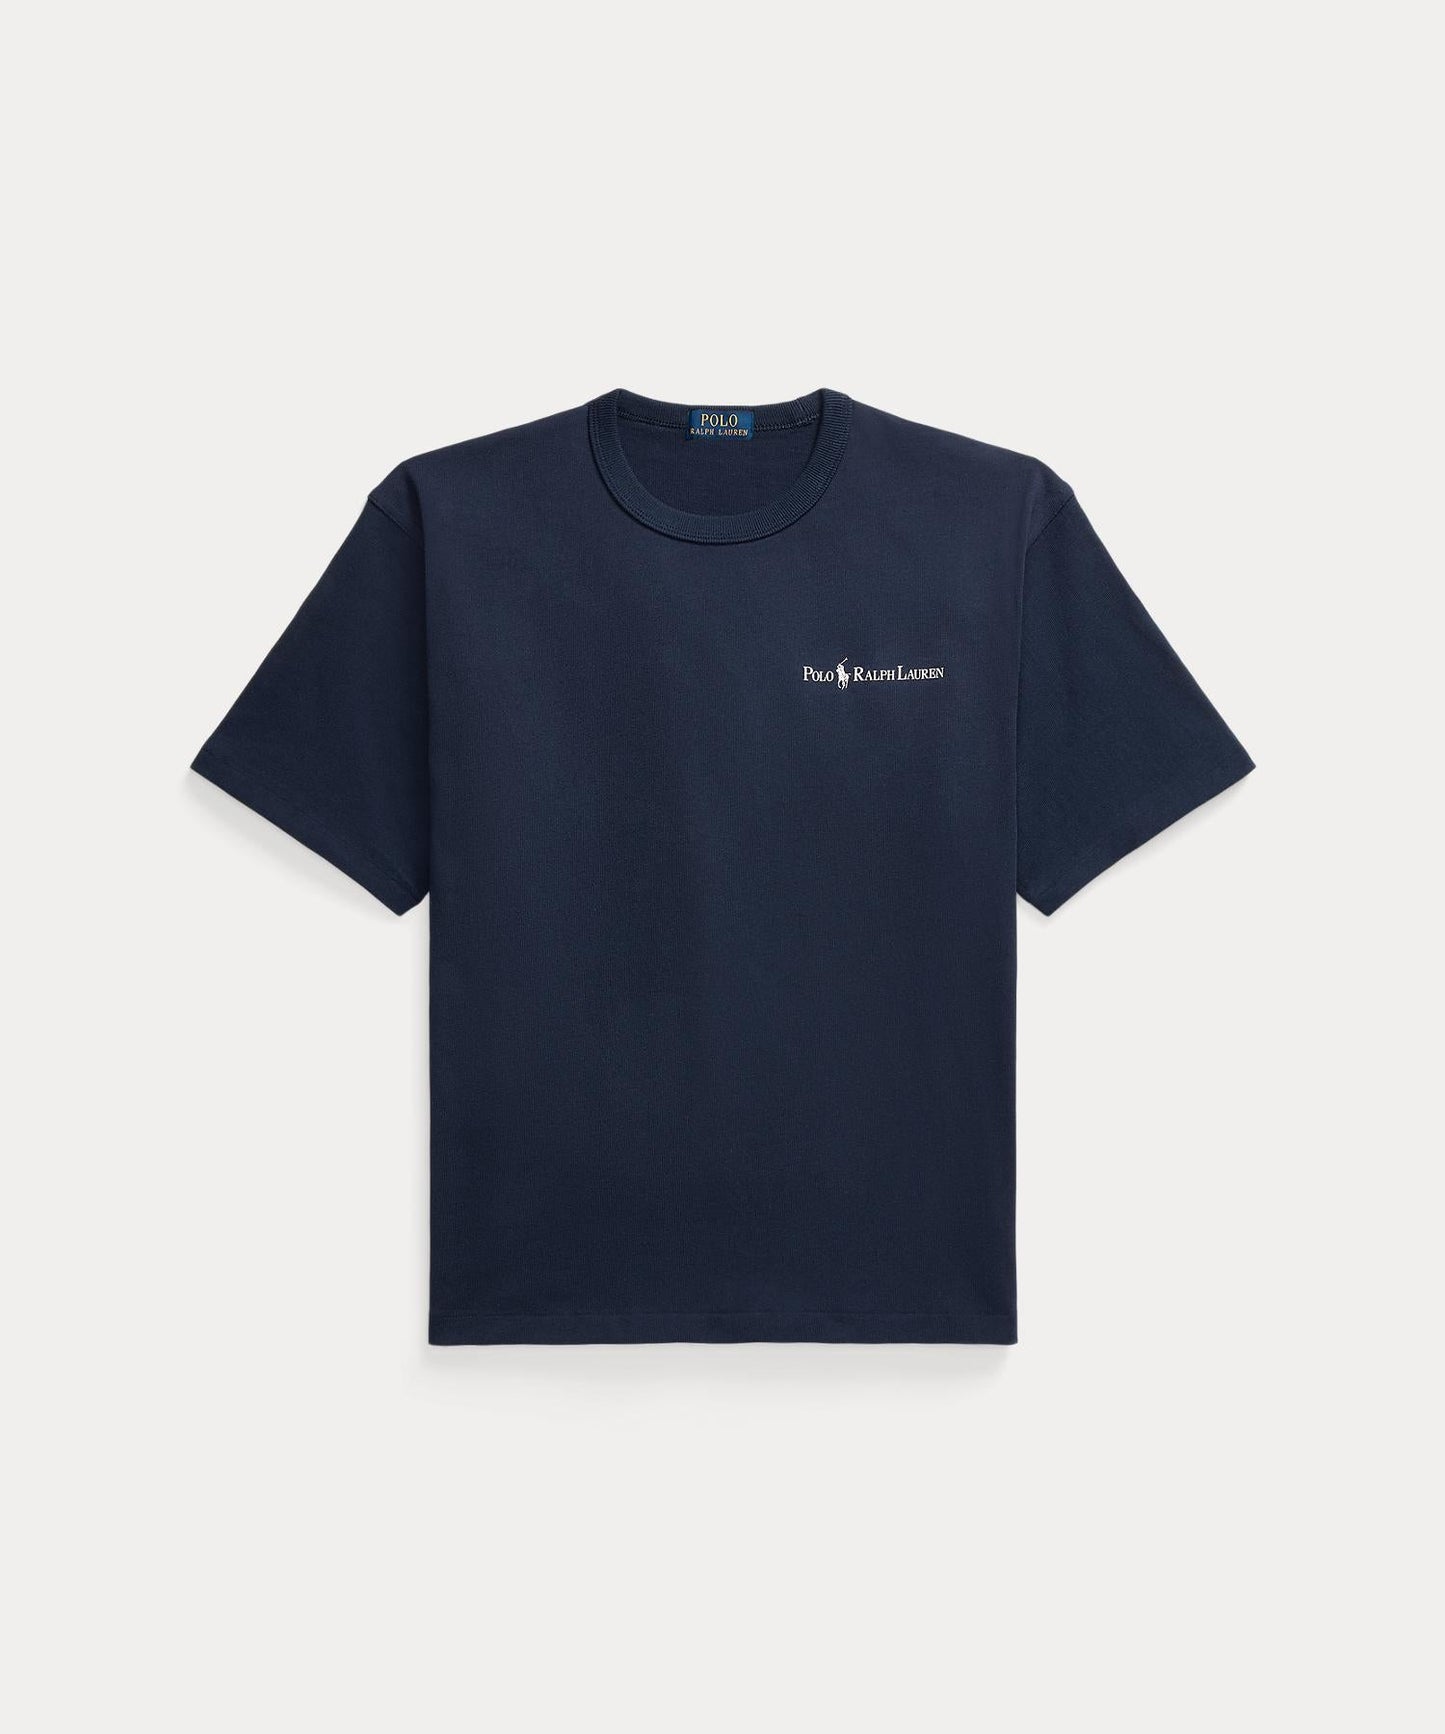 RELAXED FIT LOGO T SHIRTS